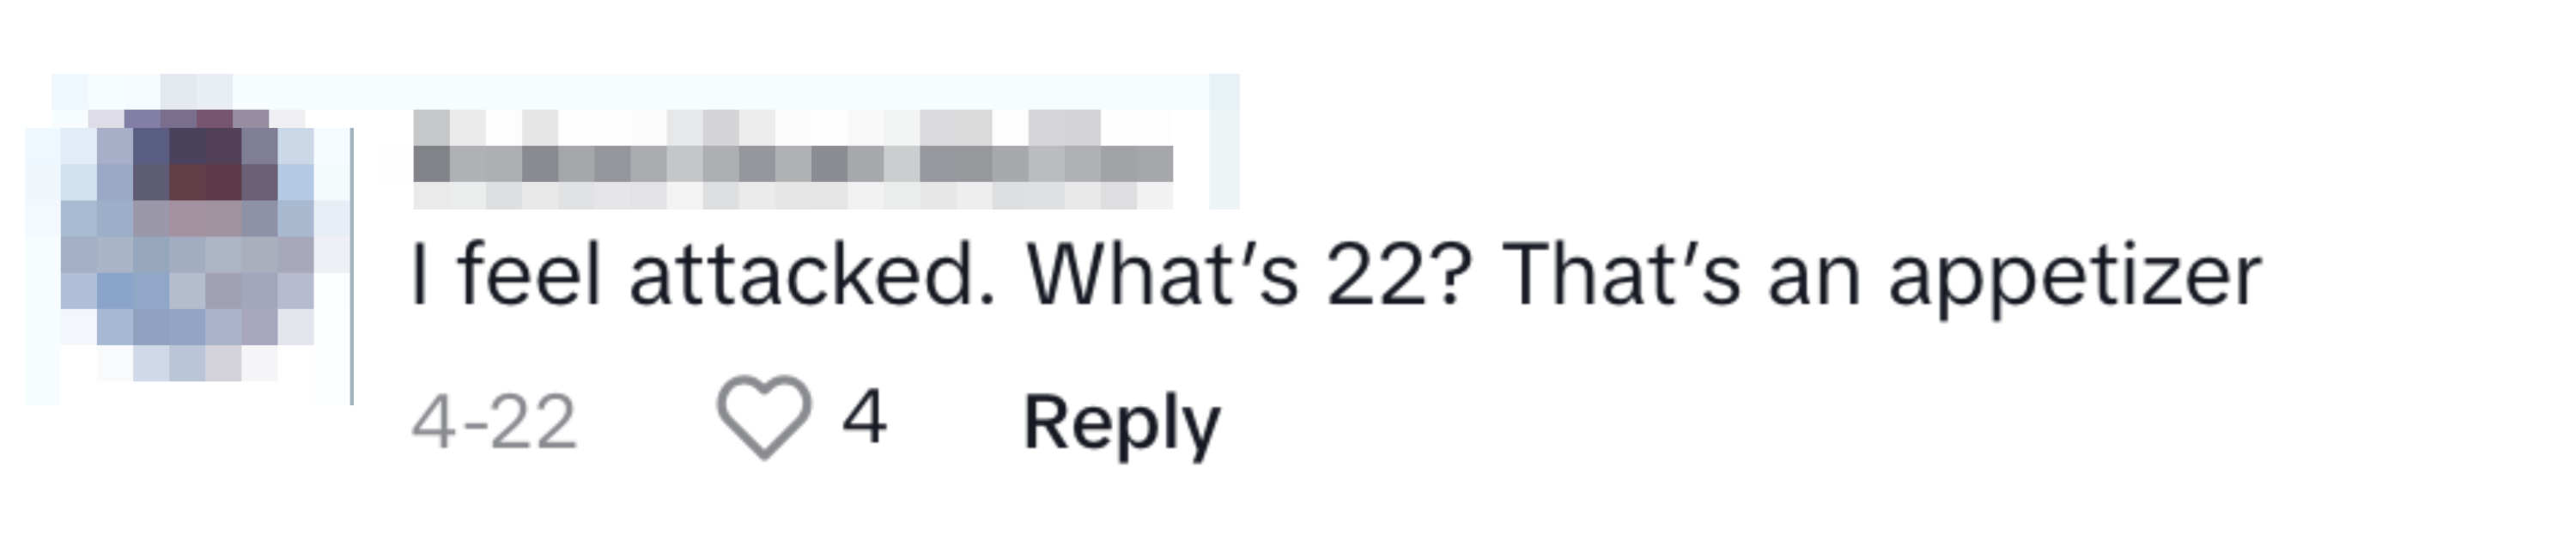 User expressing confusion about &#x27;2*2*2&#x27; referring to it as an appetizer, with likes and replies visible